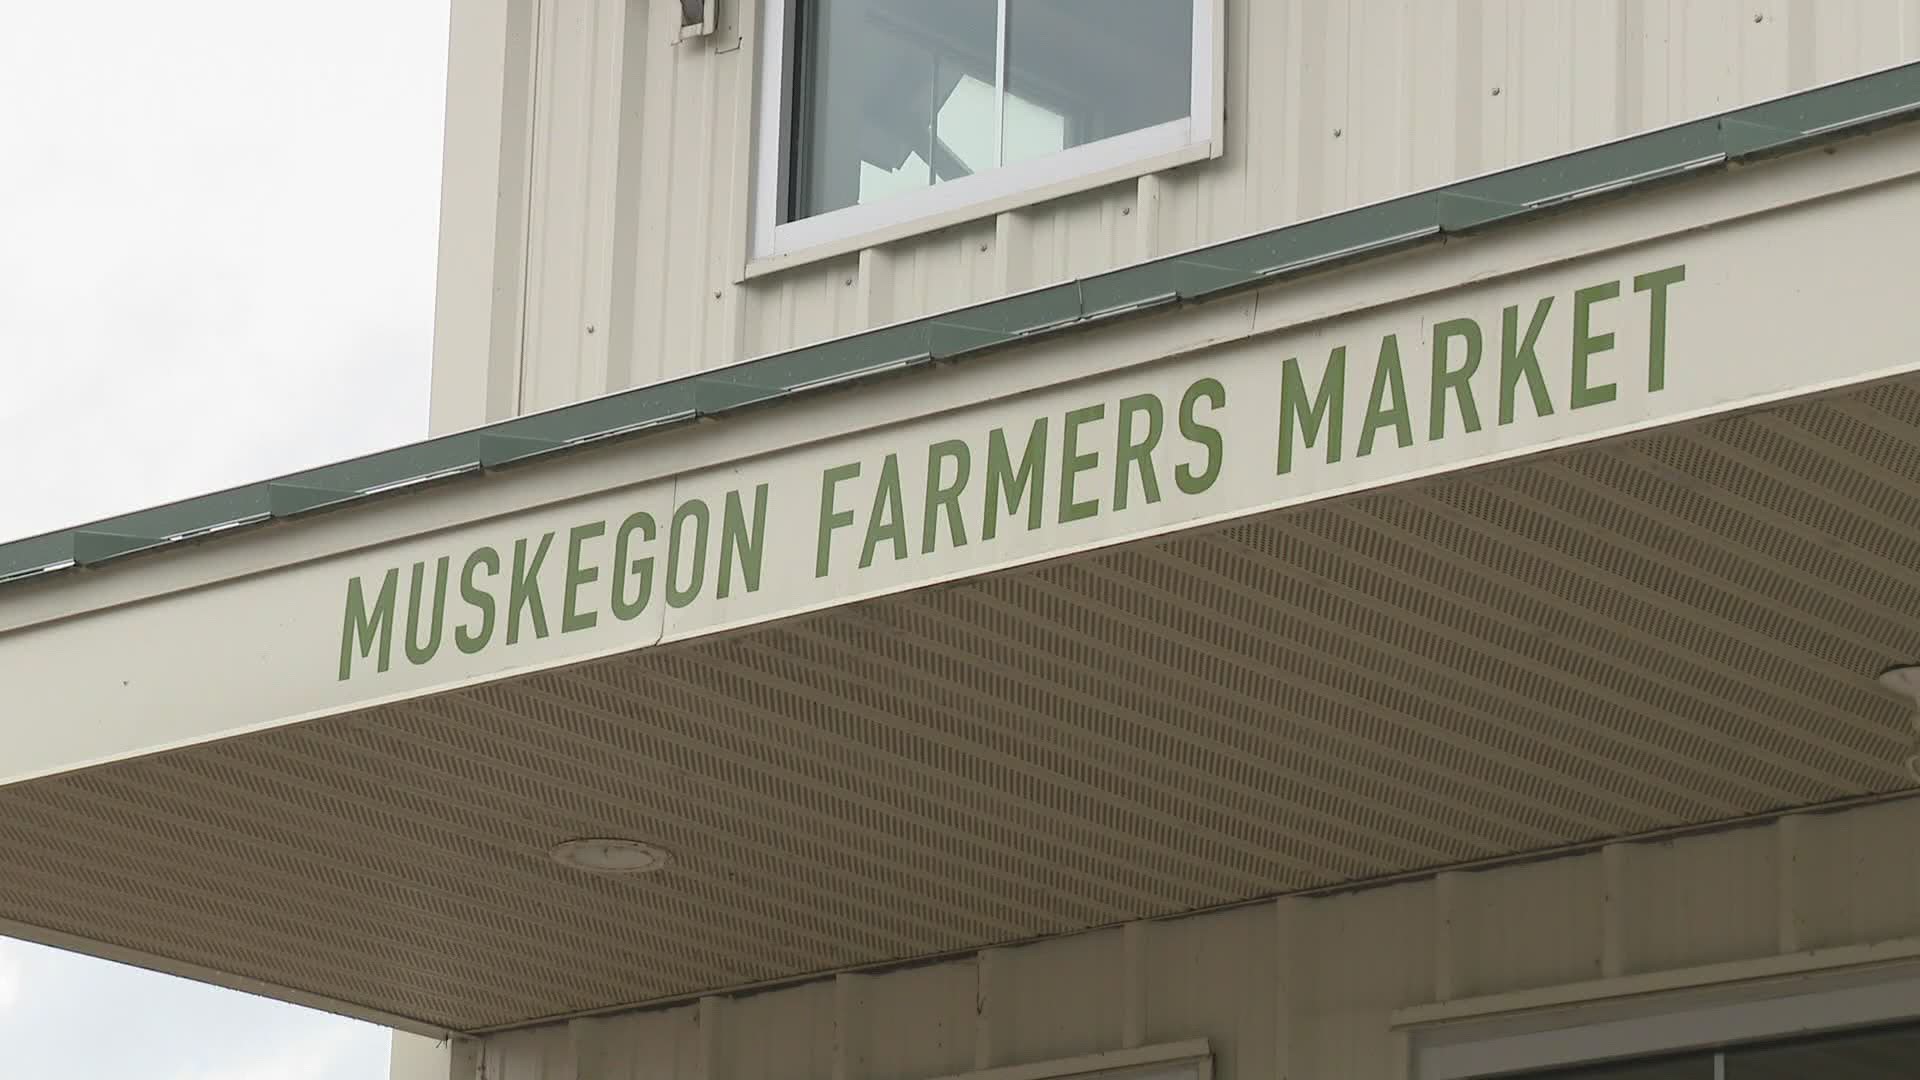 Saturday the restrooms at Muskegon's Farmers Market remained locked, the office closed, and vendors tell 13 ON YOUR SIDE no market staff were on site.